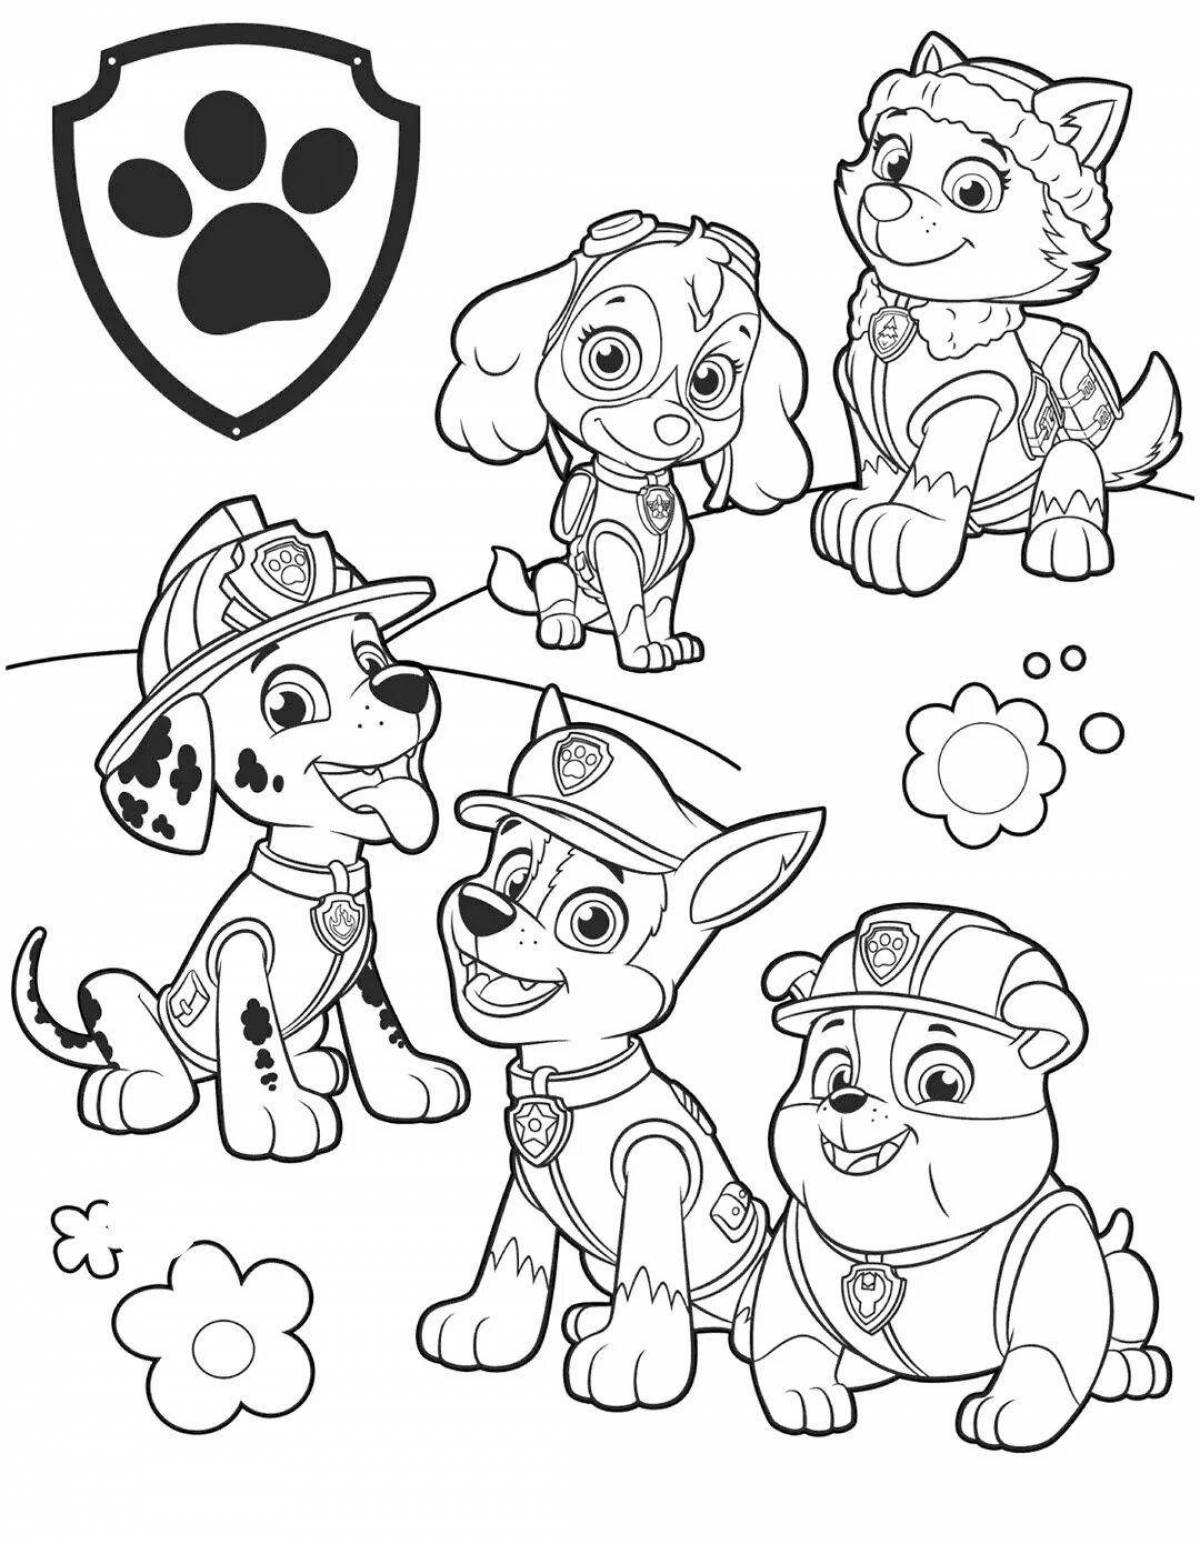 Fun coloring page paw patrol all characters